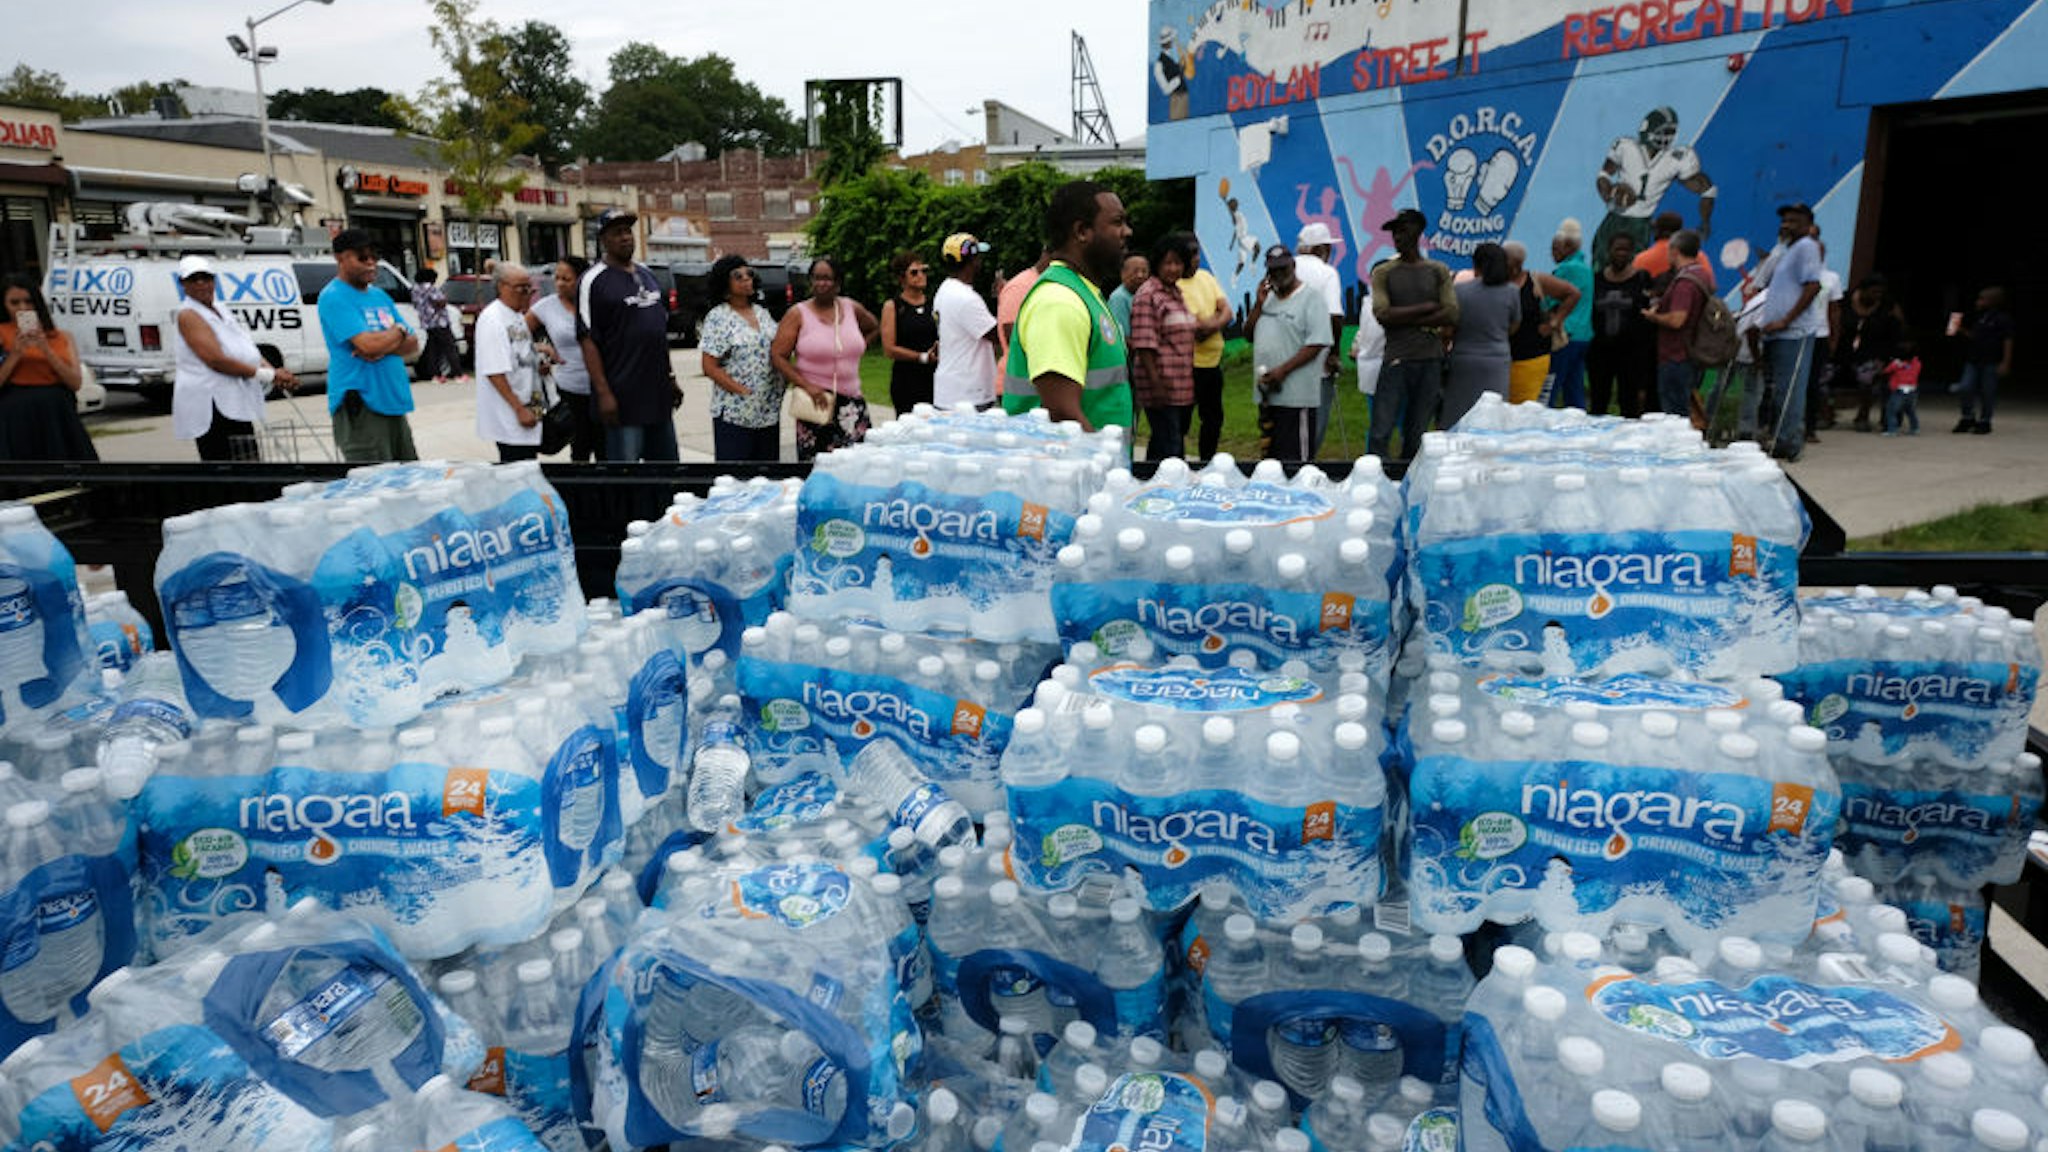 NEWARK, NEW JERSEY - AUGUST 13: A pallet of bottled water is delivered to a recreation center on August 13, 2019 in Newark, New Jersey. Residents of Newark, the largest city in New Jersey, are to receive free water after lead was found in the tap water. It was reported over the weekend that lead levels in some areas of the city were still not safe and the city has begun distributing bottled water for cooking and drinking.